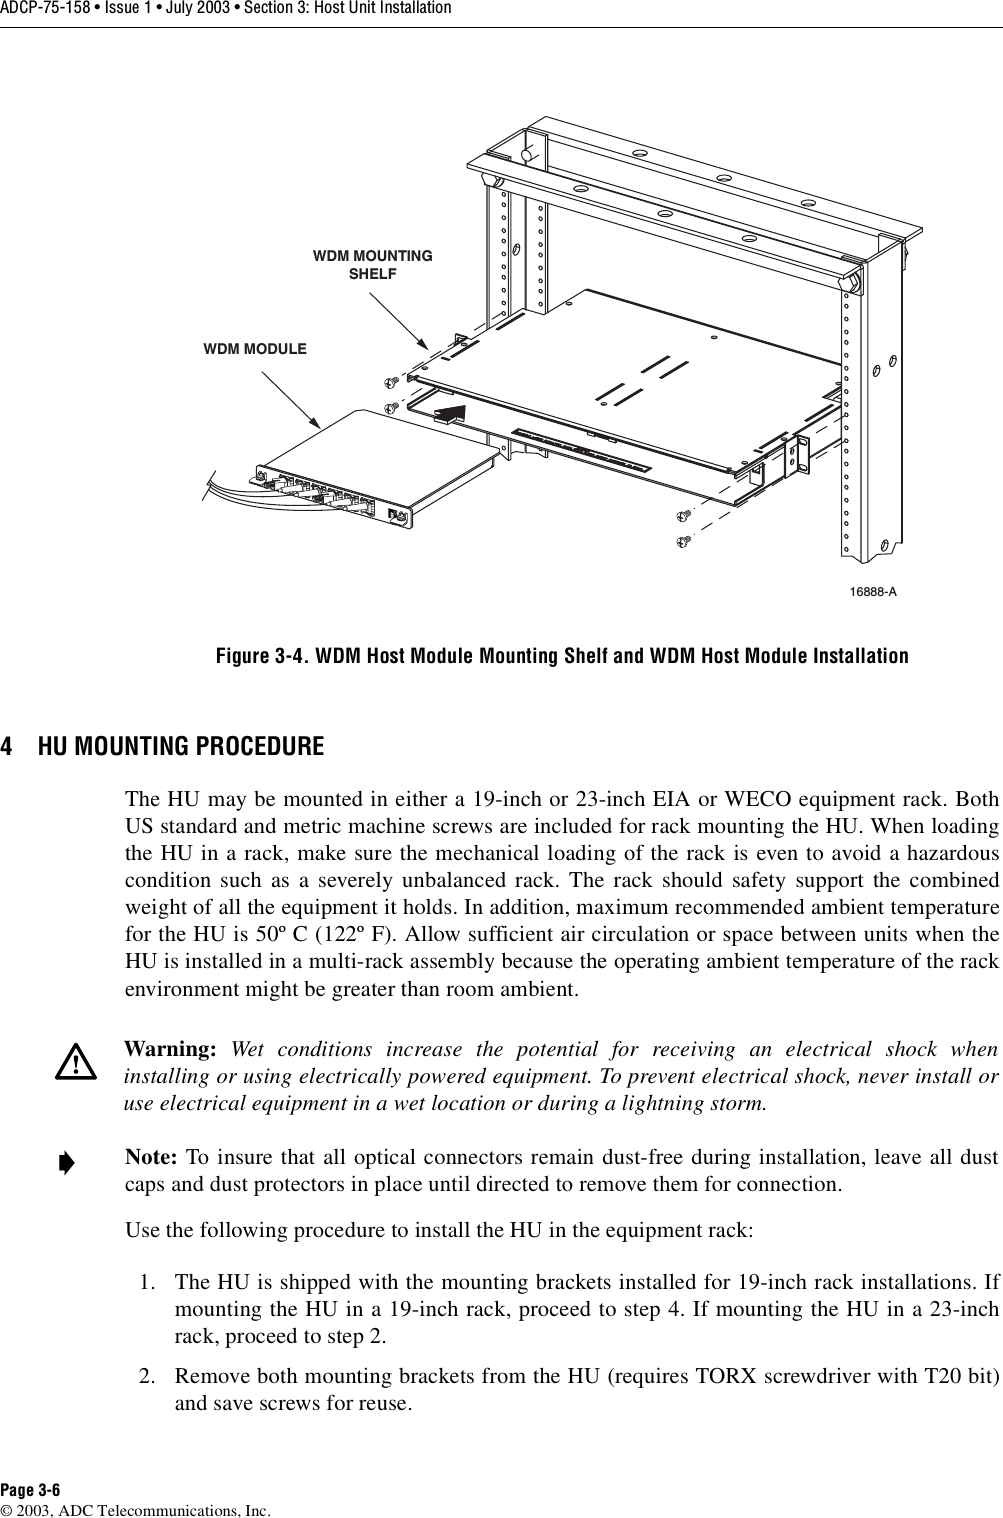 ADCP-75-158 • Issue 1 • July 2003 • Section 3: Host Unit InstallationPage 3-6© 2003, ADC Telecommunications, Inc.Figure 3-4. WDM Host Module Mounting Shelf and WDM Host Module Installation4 HU MOUNTING PROCEDUREThe HU may be mounted in either a 19-inch or 23-inch EIA or WECO equipment rack. BothUS standard and metric machine screws are included for rack mounting the HU. When loadingthe HU in a rack, make sure the mechanical loading of the rack is even to avoid a hazardouscondition such as a severely unbalanced rack. The rack should safety support the combinedweight of all the equipment it holds. In addition, maximum recommended ambient temperaturefor the HU is 50º C (122º F). Allow sufficient air circulation or space between units when theHU is installed in a multi-rack assembly because the operating ambient temperature of the rackenvironment might be greater than room ambient. Use the following procedure to install the HU in the equipment rack:1. The HU is shipped with the mounting brackets installed for 19-inch rack installations. Ifmounting the HU in a 19-inch rack, proceed to step 4. If mounting the HU in a 23-inchrack, proceed to step 2. 2. Remove both mounting brackets from the HU (requires TORX screwdriver with T20 bit)and save screws for reuse. Warning:  Wet conditions increase the potential for receiving an electrical shock wheninstalling or using electrically powered equipment. To prevent electrical shock, never install oruse electrical equipment in a wet location or during a lightning storm. Note: To insure that all optical connectors remain dust-free during installation, leave all dustcaps and dust protectors in place until directed to remove them for connection. 16888-A WDM MODULEWDM MOUNTINGSHELF